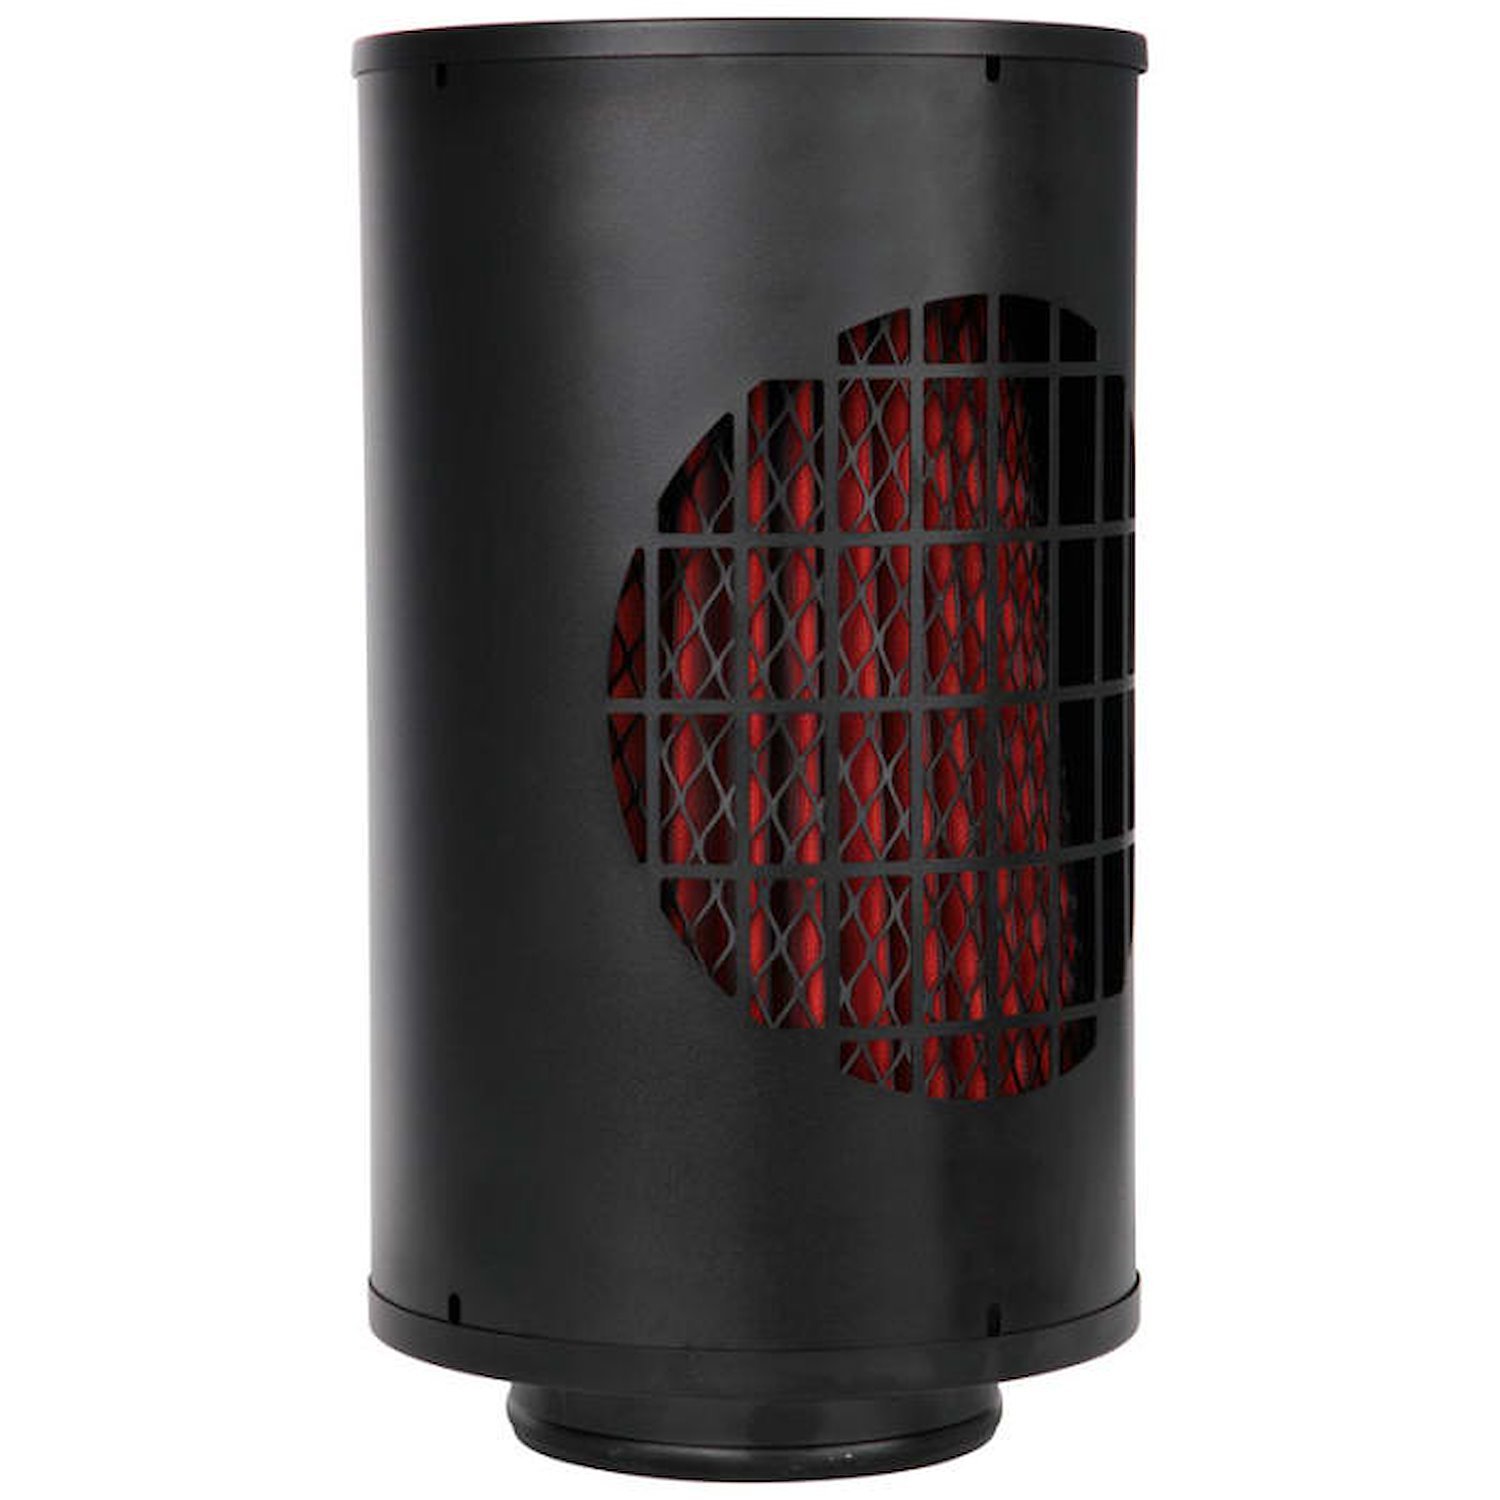 Standard-Flow Heavy-Duty Air Filter For Trucks, RVs & Agricultural Equipment